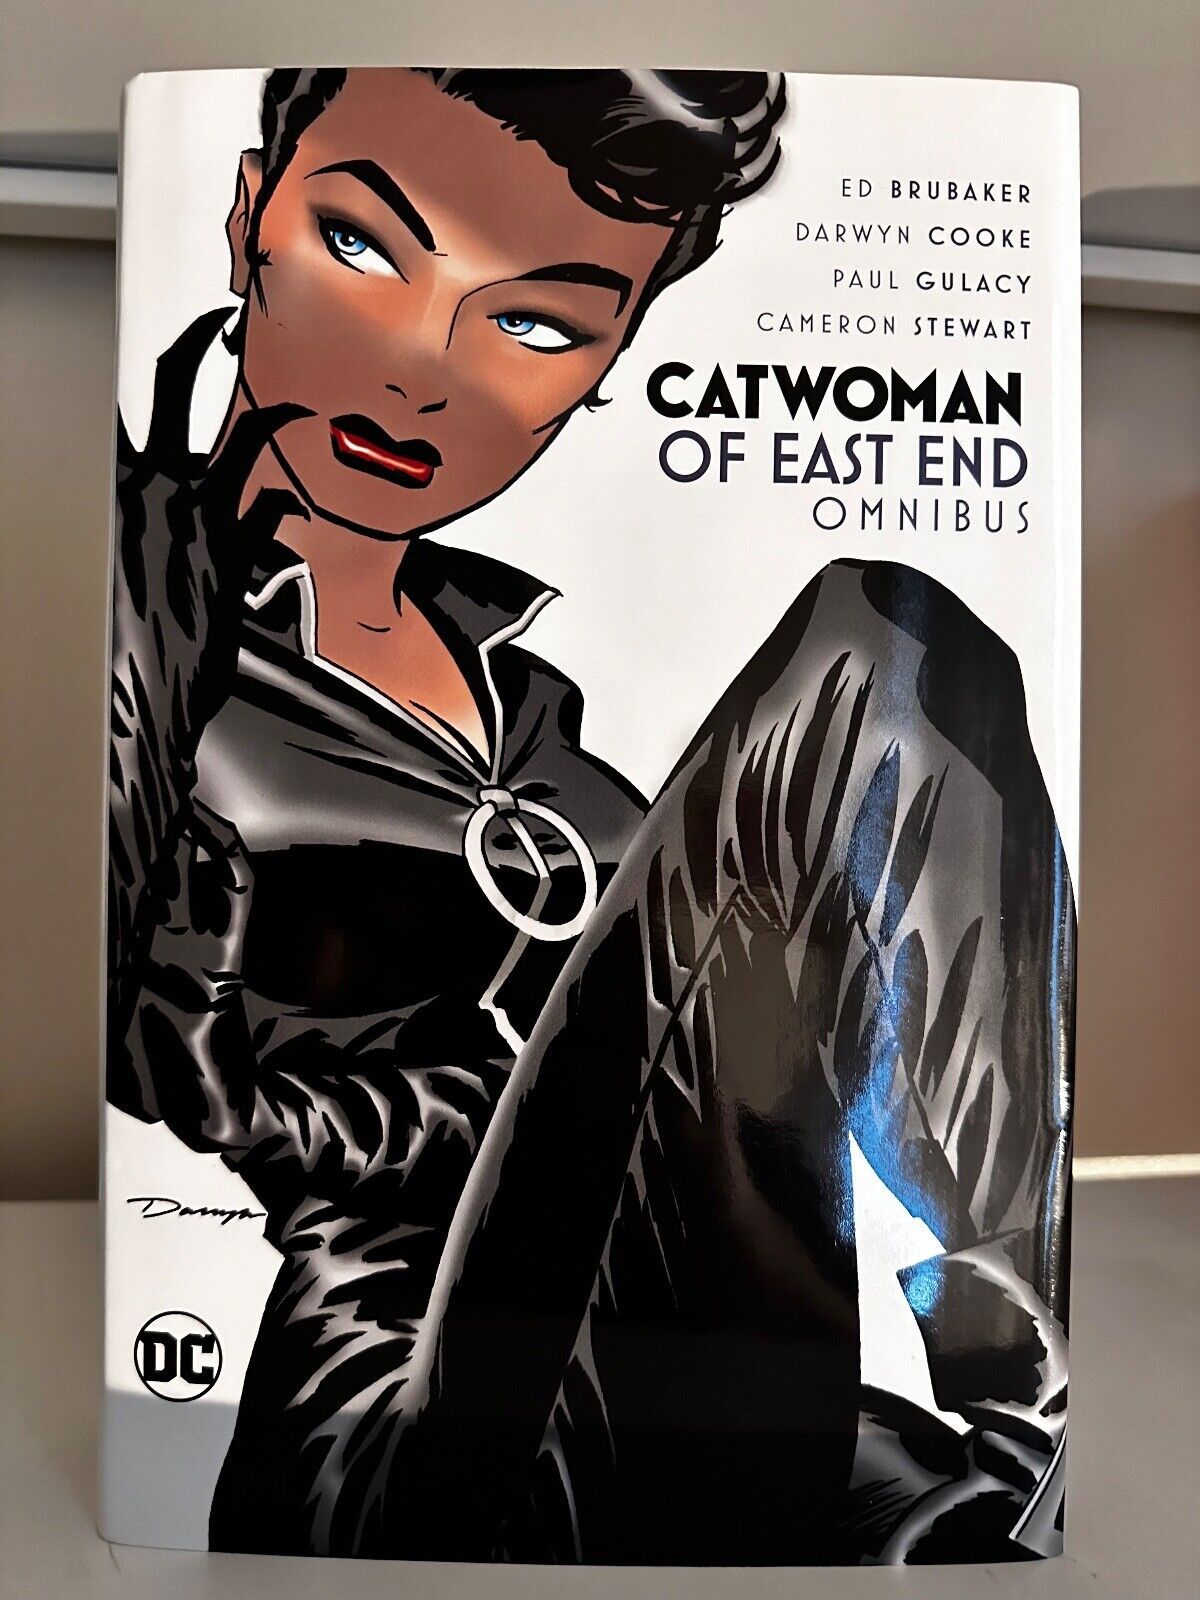 Catwoman of East End Omnibus (DC Comics August 2022)